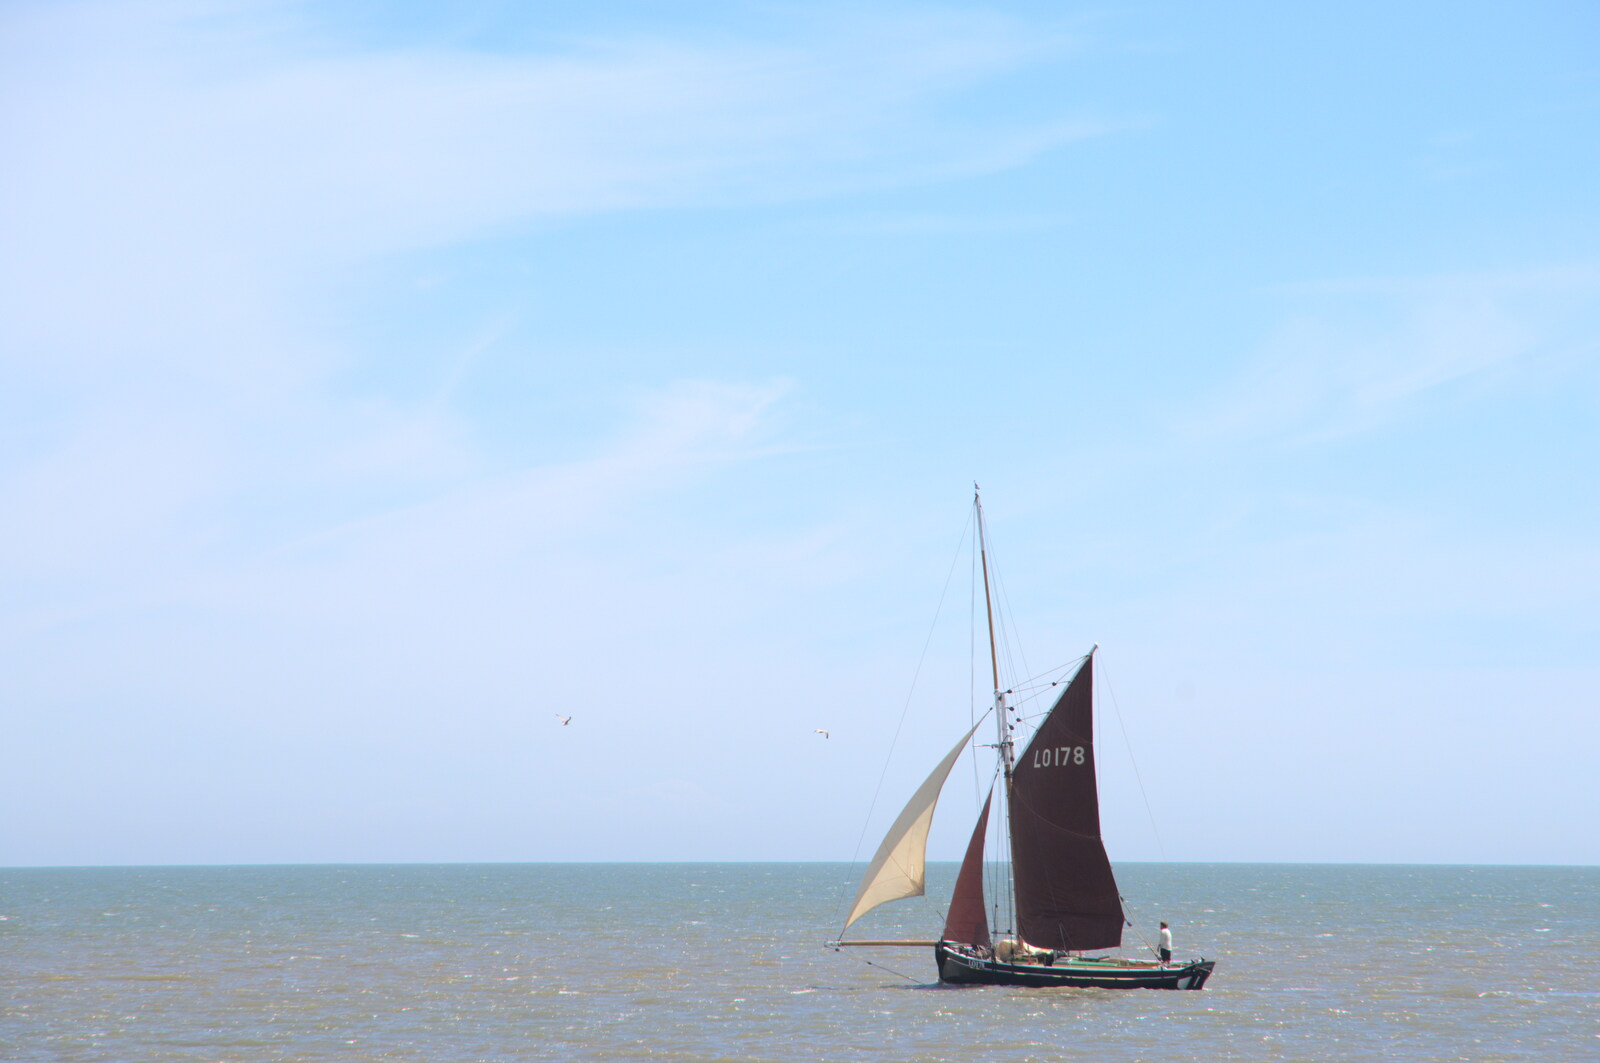 The fishing boats sails off along the coast from A Return to Southwold, Suffolk - 14th June 2020